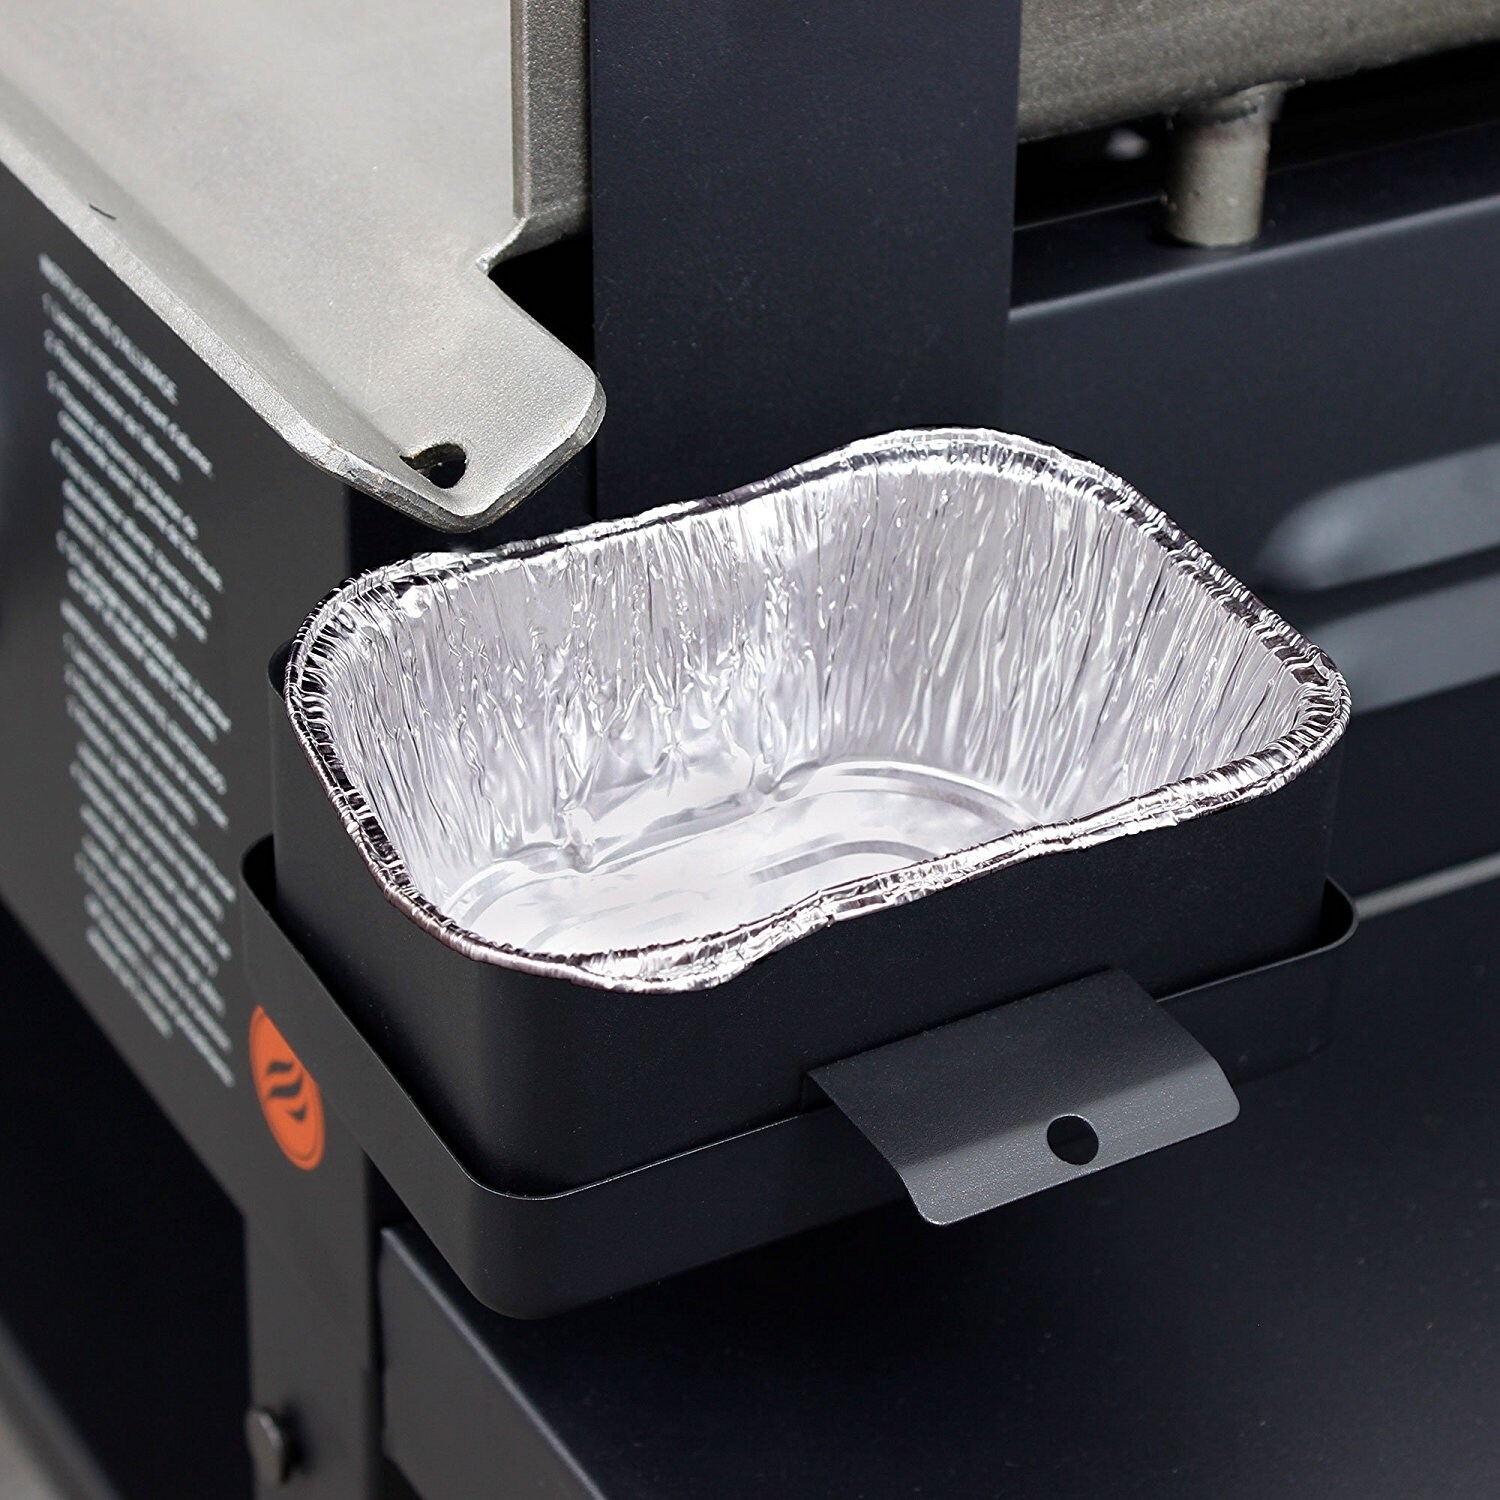 https://ak1.ostkcdn.com/images/products/is/images/direct/b7a49e290cc79db9cca5d225f0c7ce42c290e38c/Yukon-Glory-Disposable-Aluminum-Foil-Drip-Pan-for-Blackstone-Griddles-28-Inch-and-36-Inch.jpg